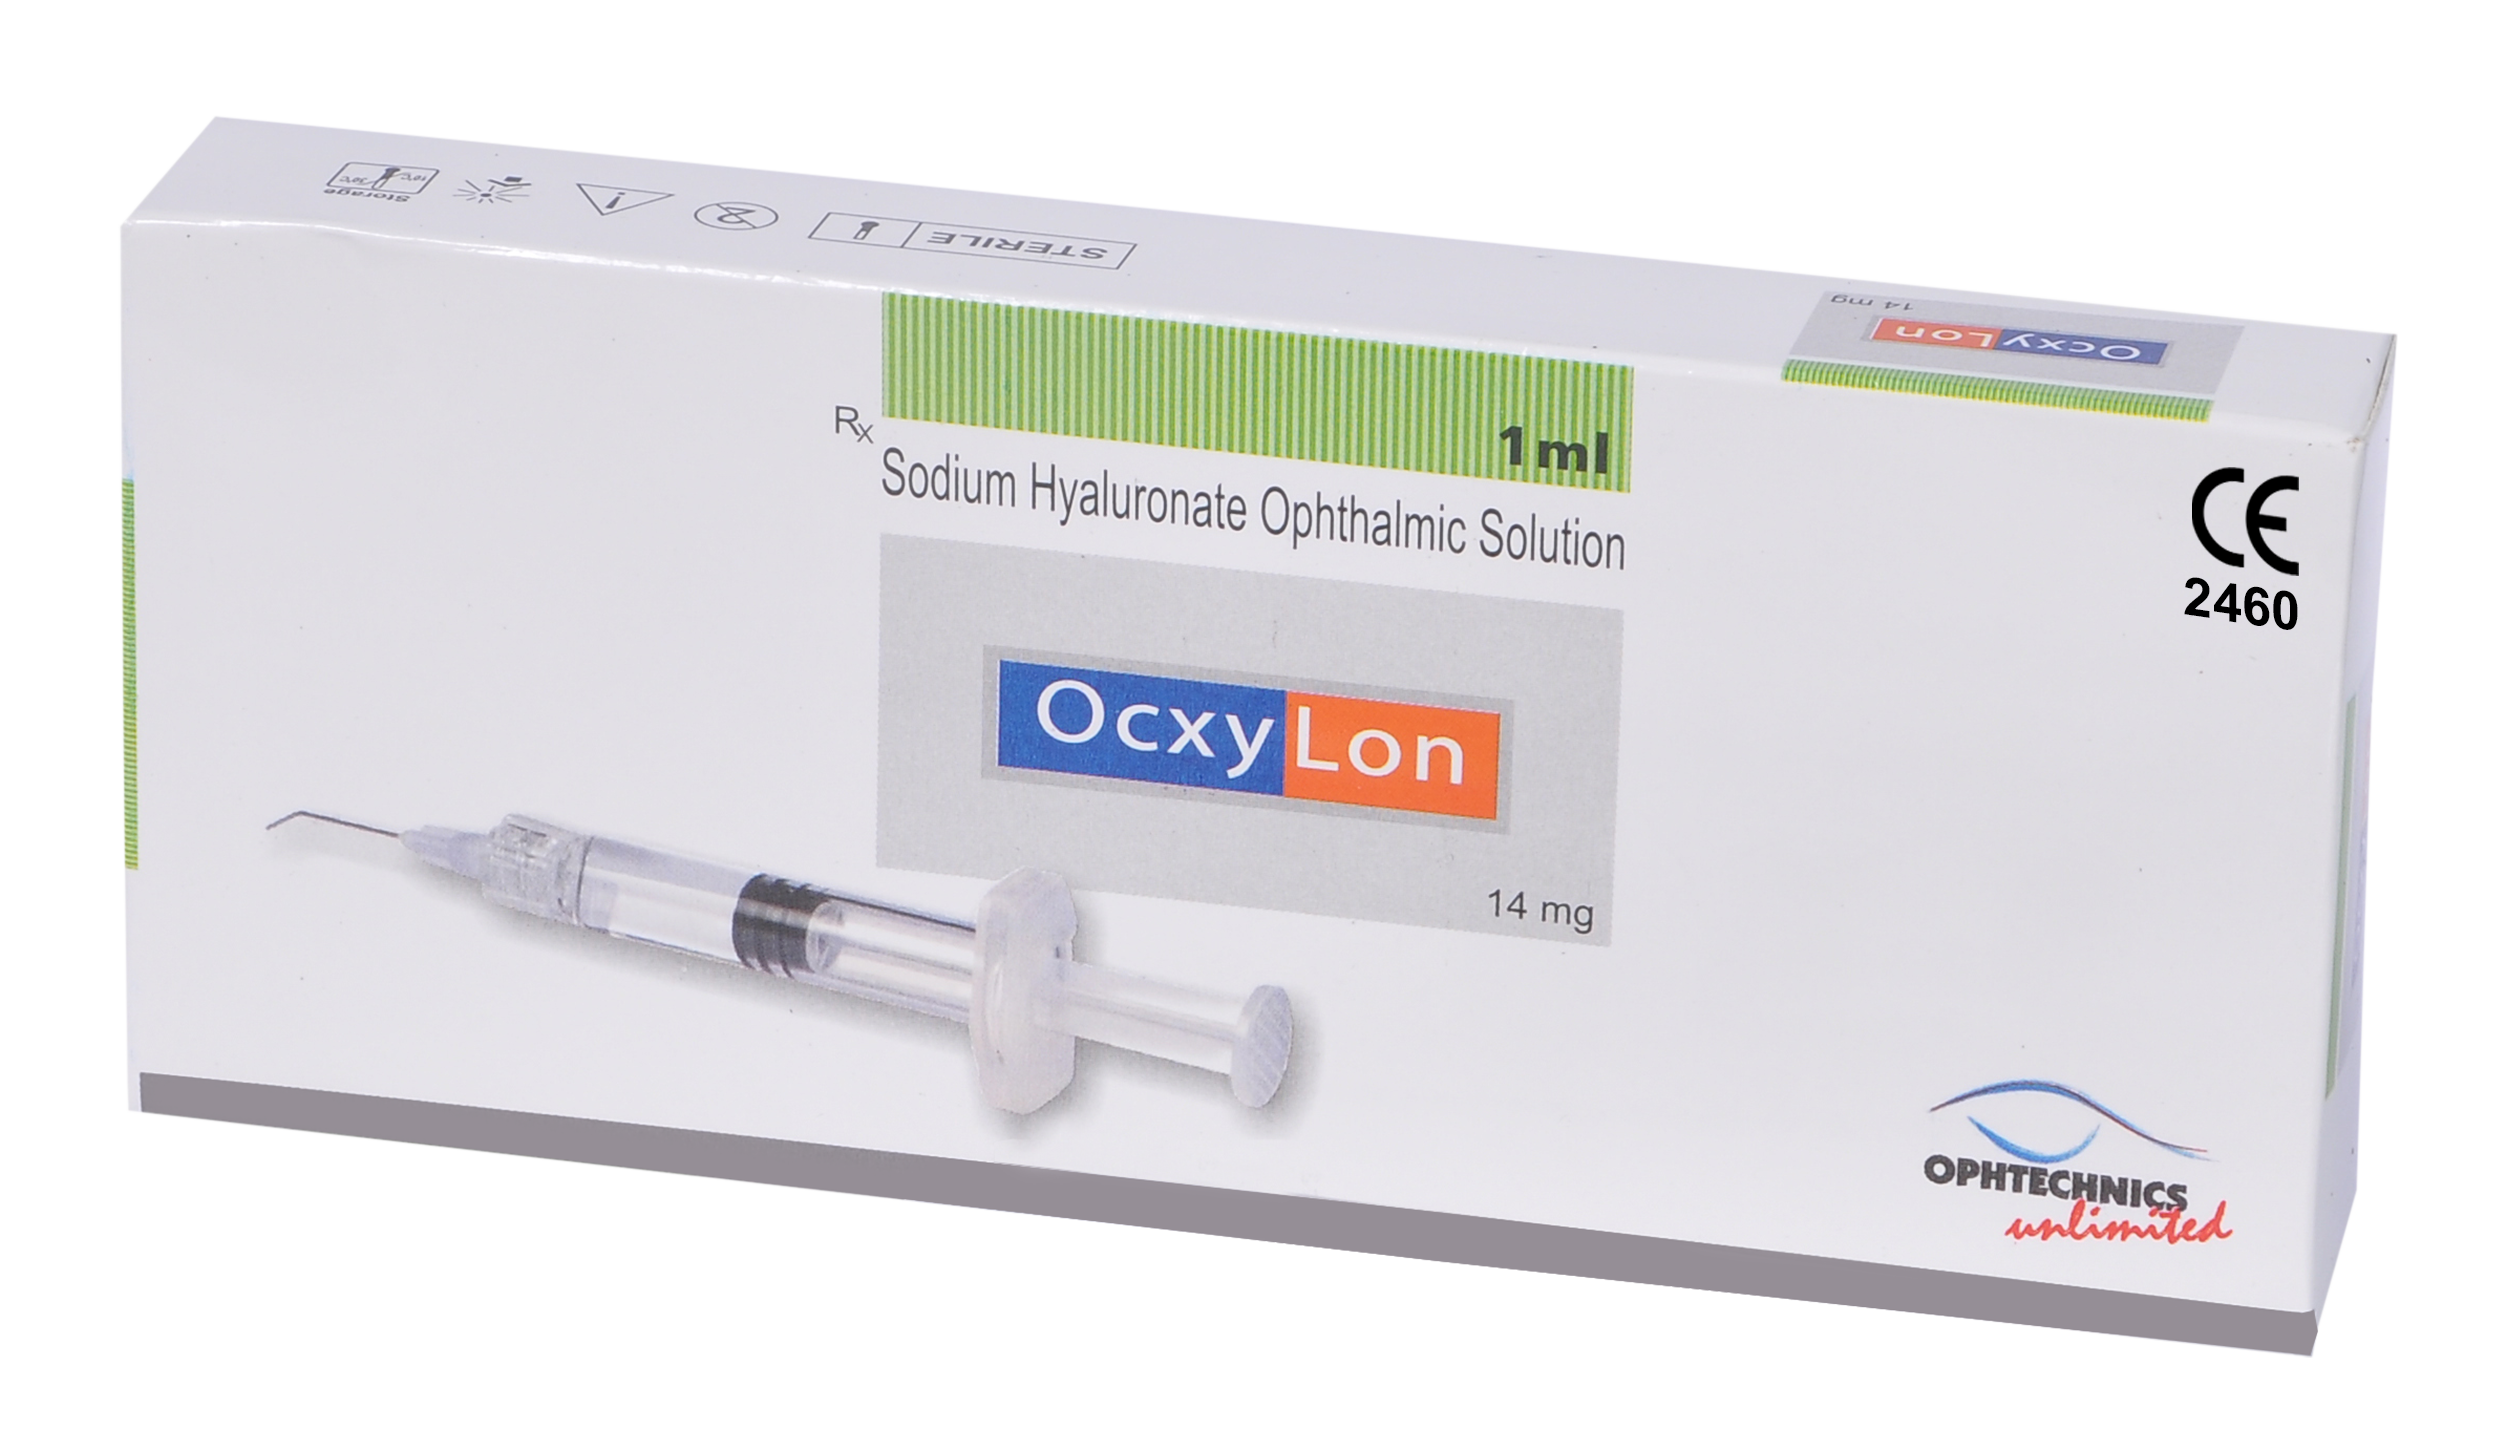 Sodium Hyaluronate Ophthalmic solution